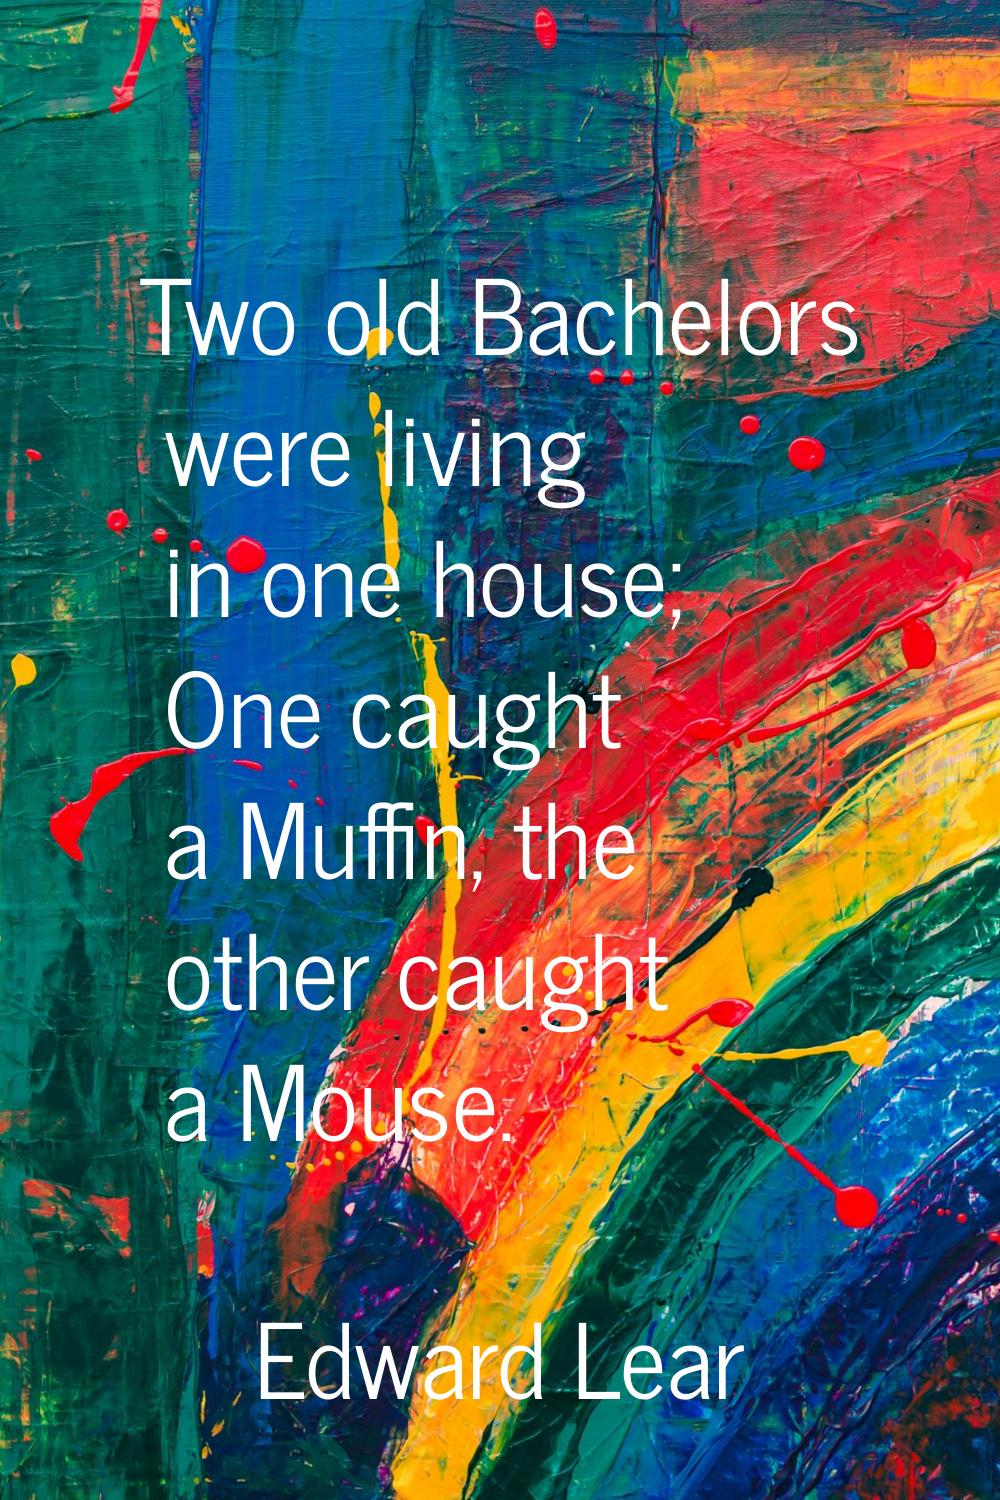 Two old Bachelors were living in one house; One caught a Muffin, the other caught a Mouse.